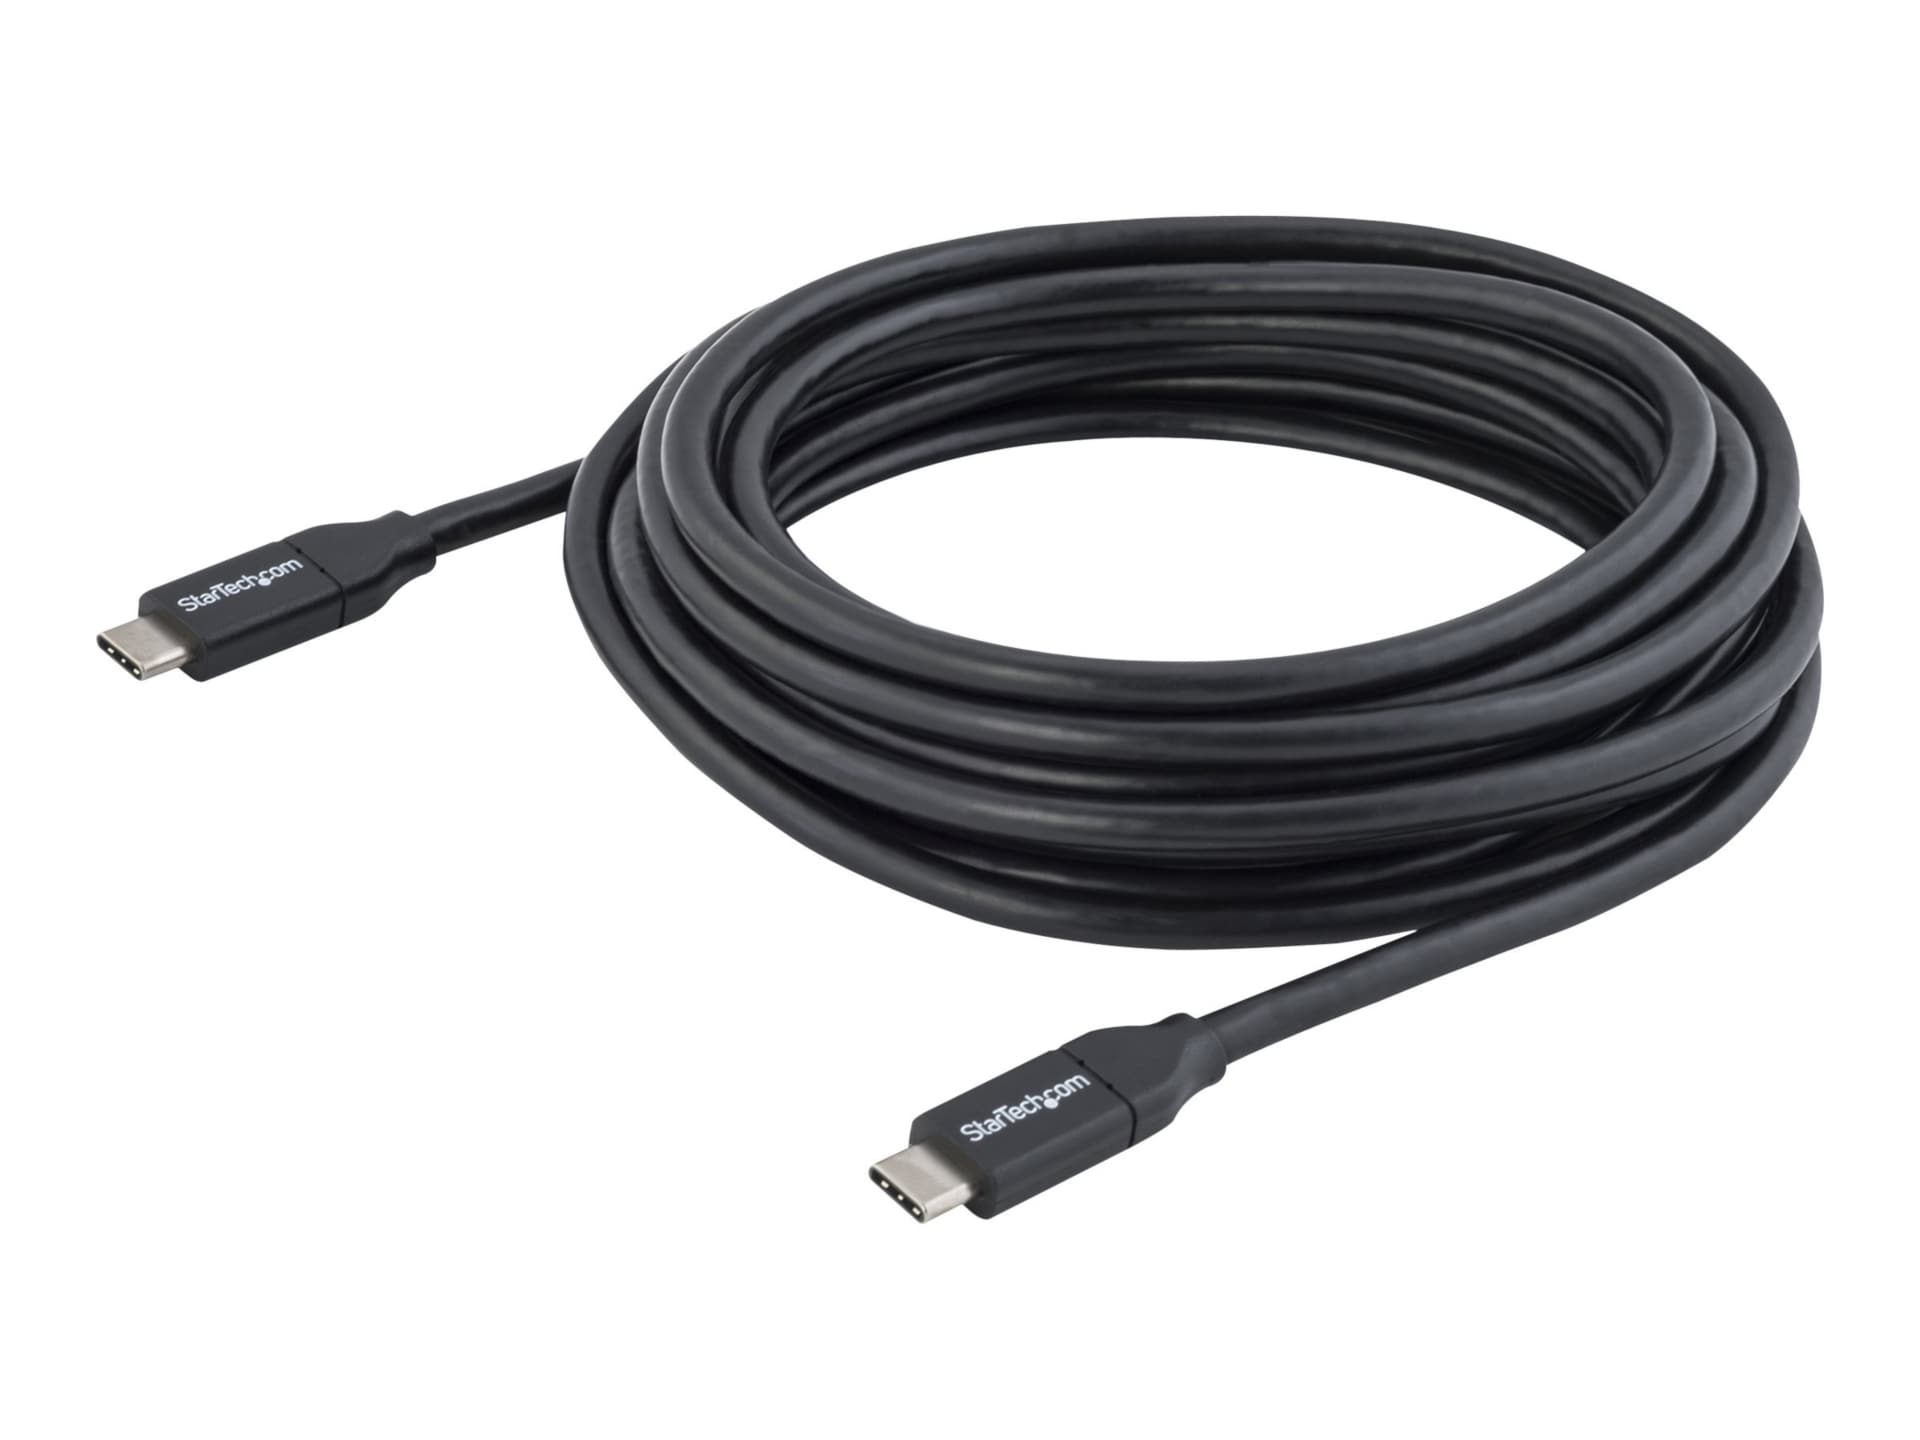 USB-C Cable with Power Delivery (5A) - M/M - 4 m (13 ft.) - USB 2.0 -  USB-IF Certified